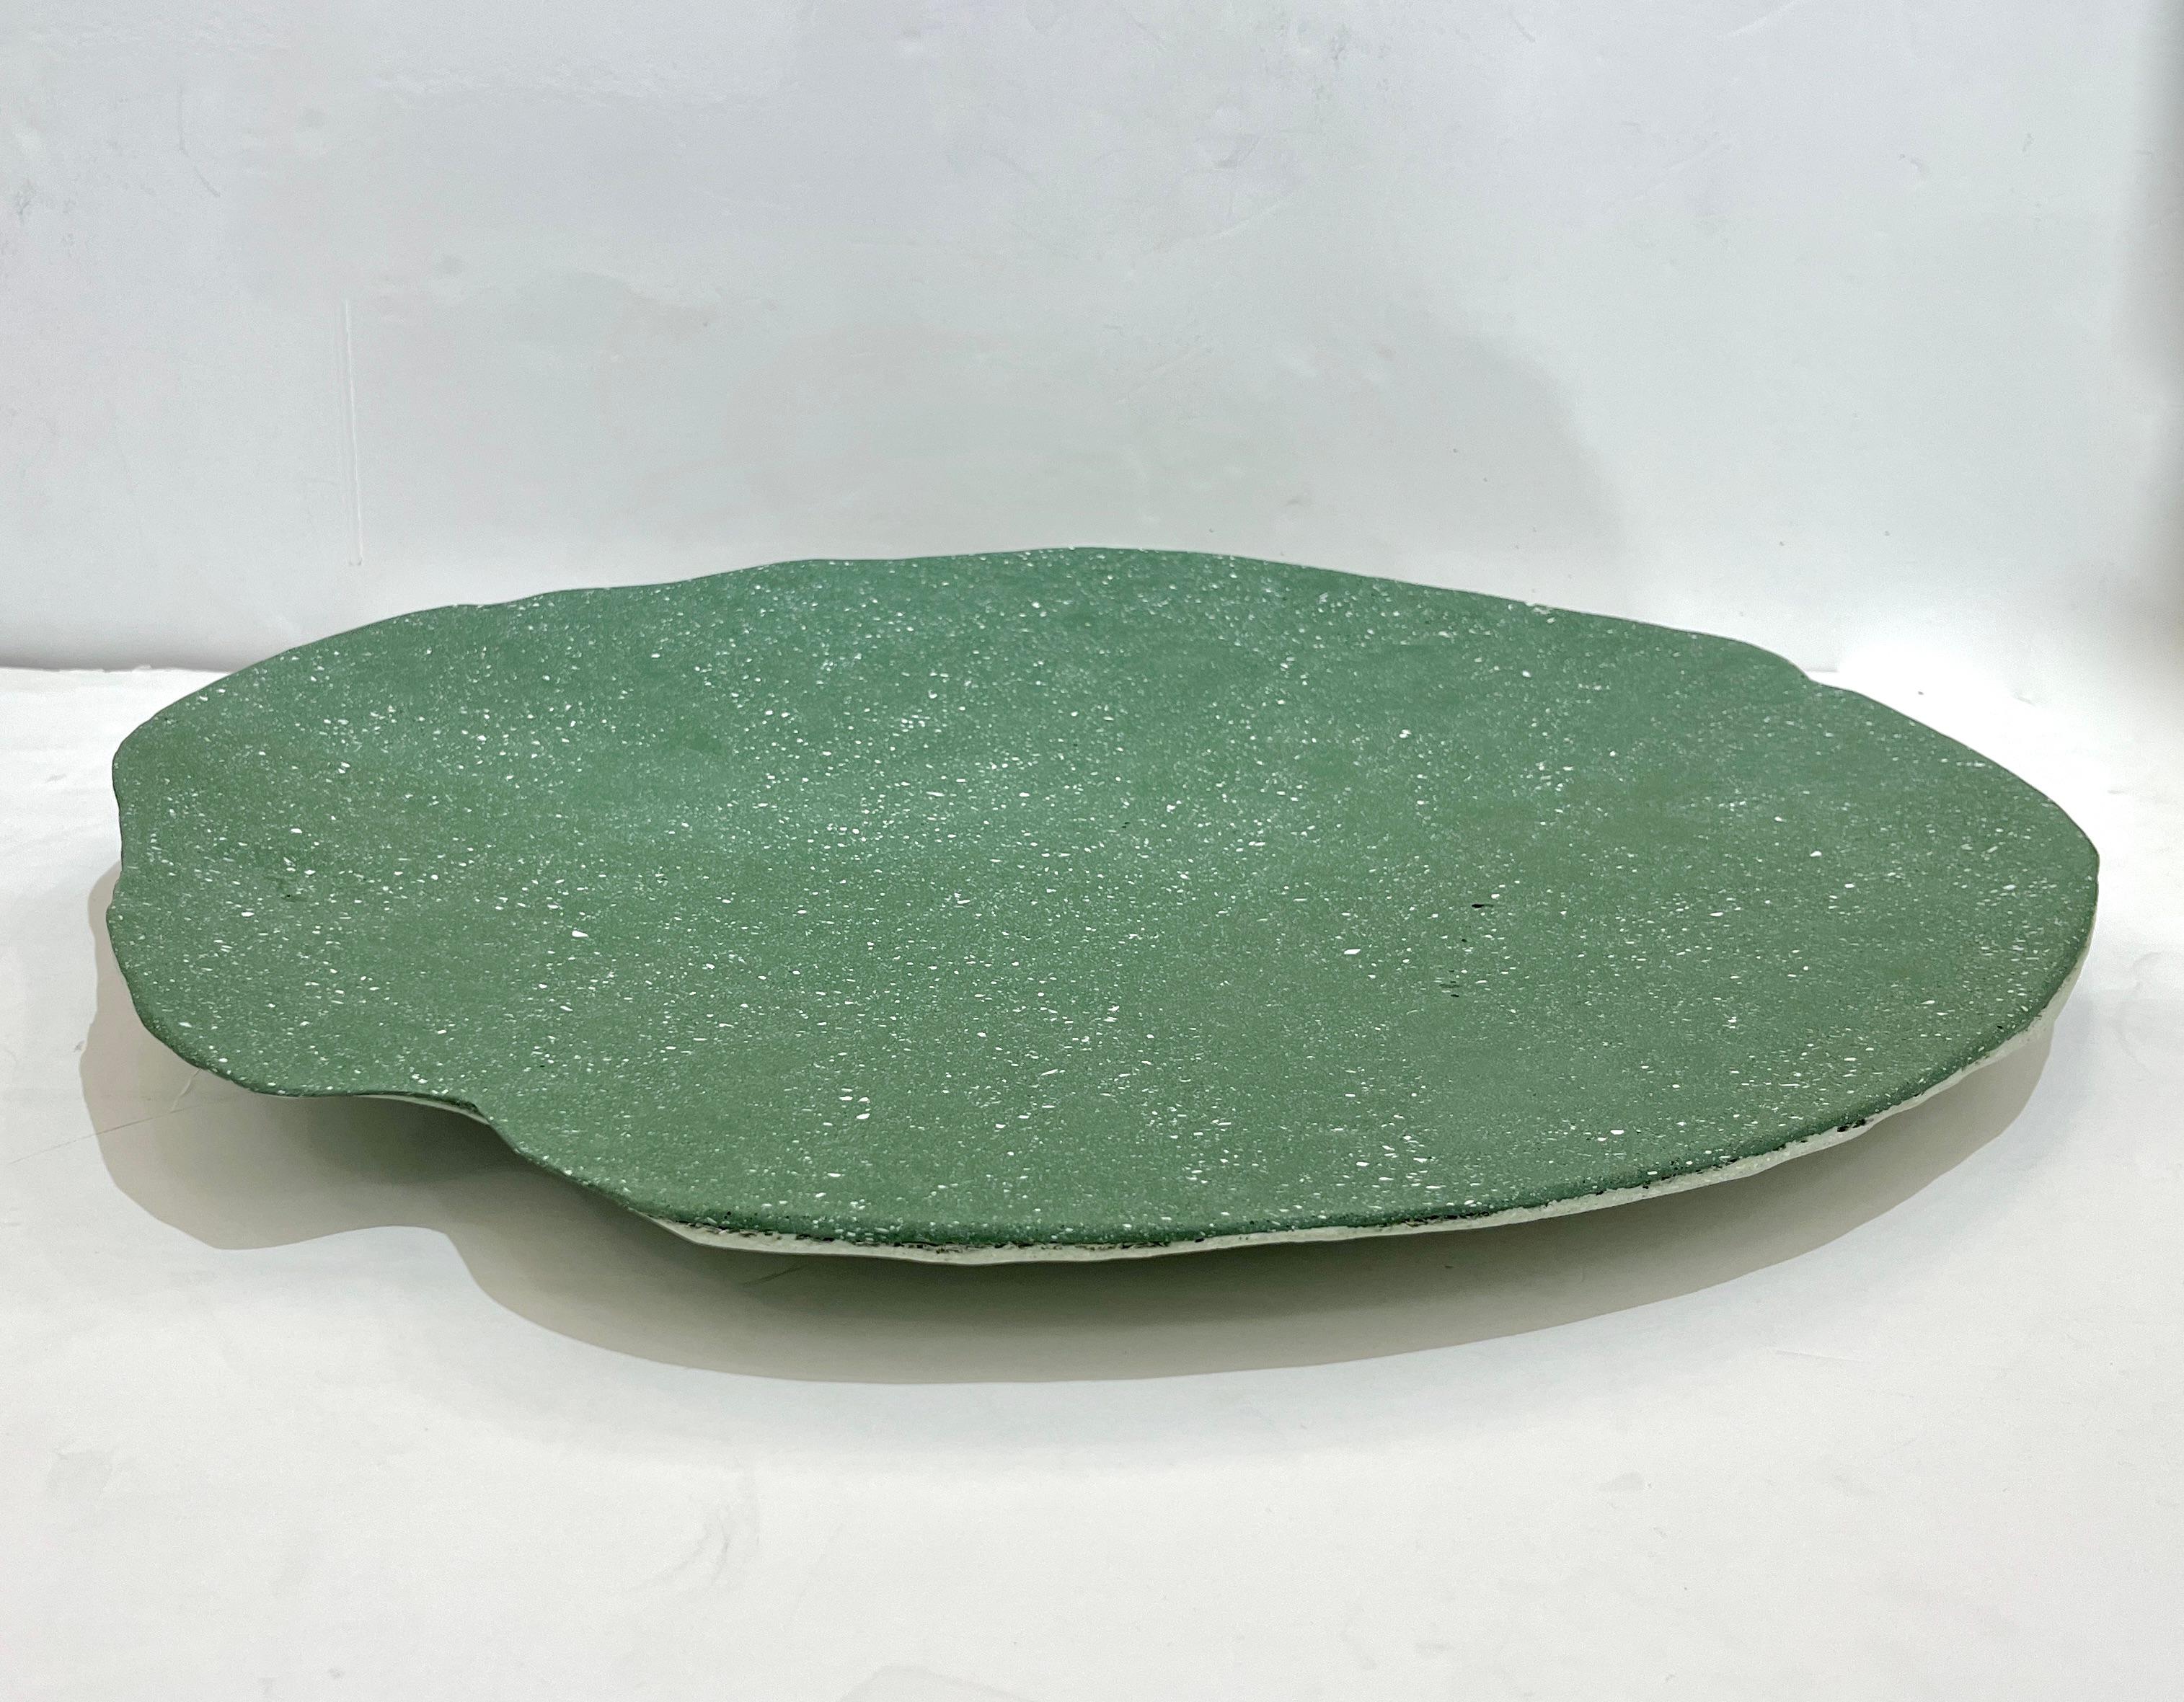 This organic amorphous centerpiece, in lush green flourishing with white color, is created as a piece of Art by Italian artist and designer, GioMinelli. Realized using and mixing recycled fiberglass and resin with the concept of sustainability in